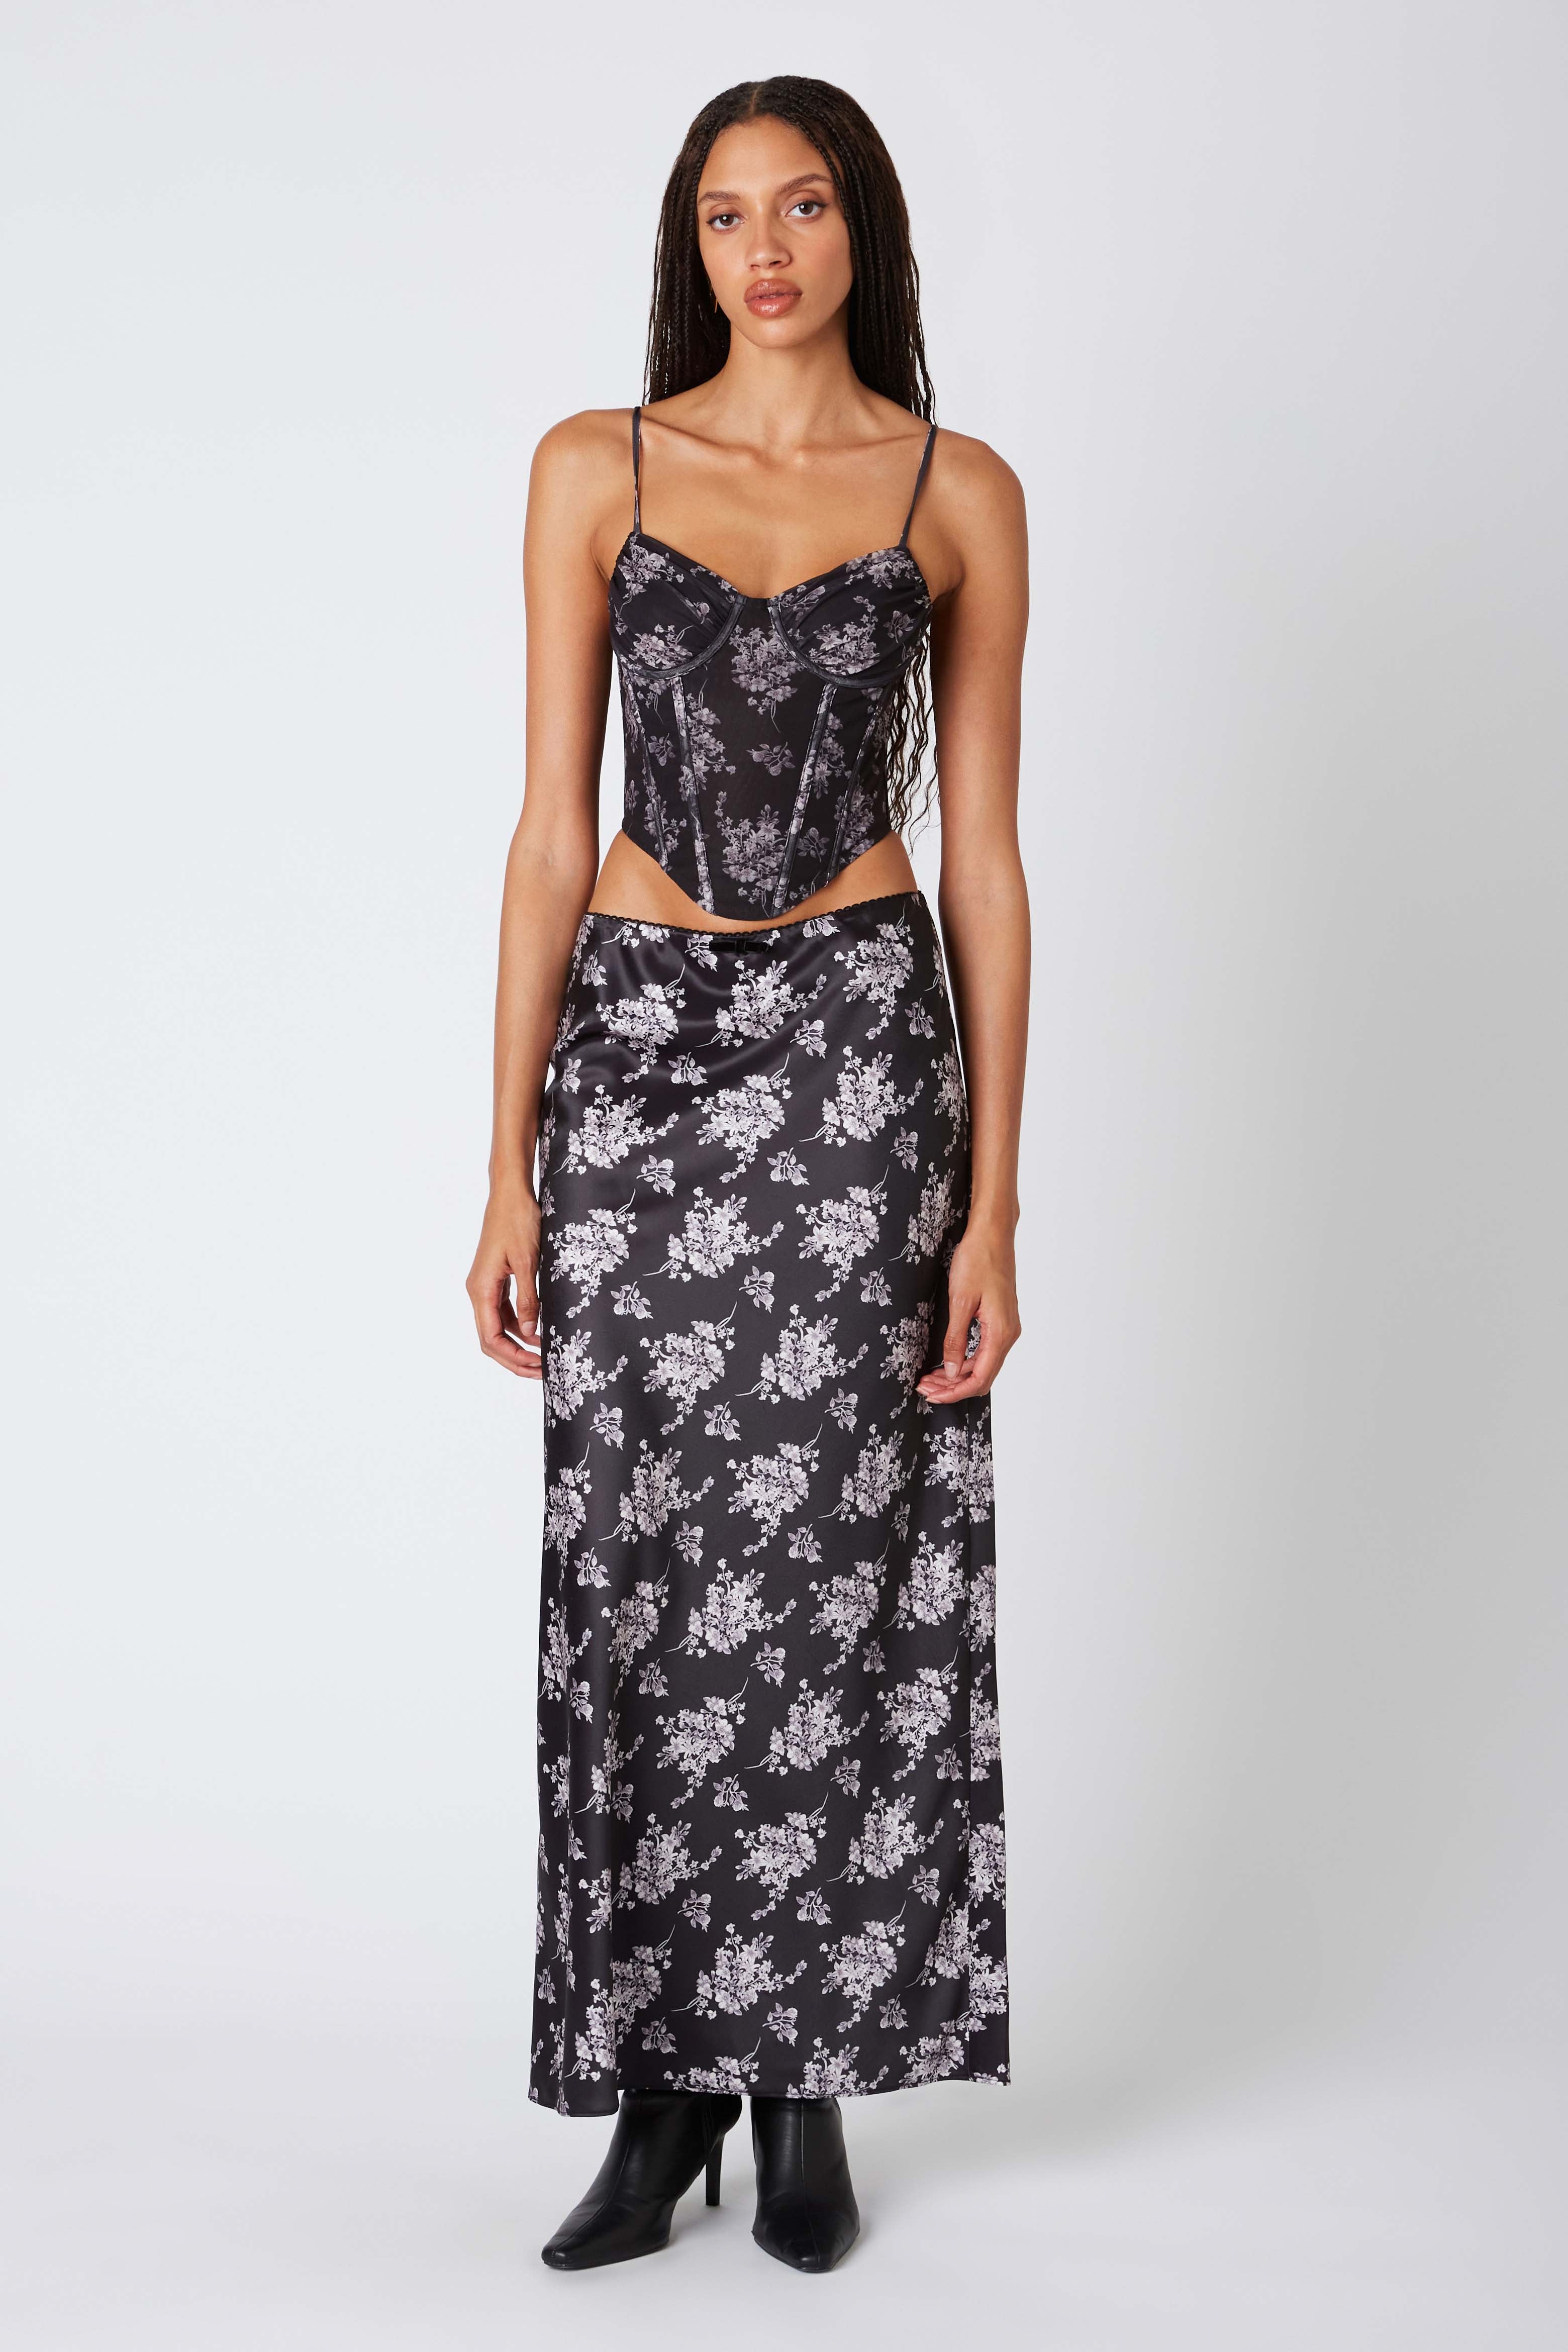 Floral Maxi Skirt in Black Front View